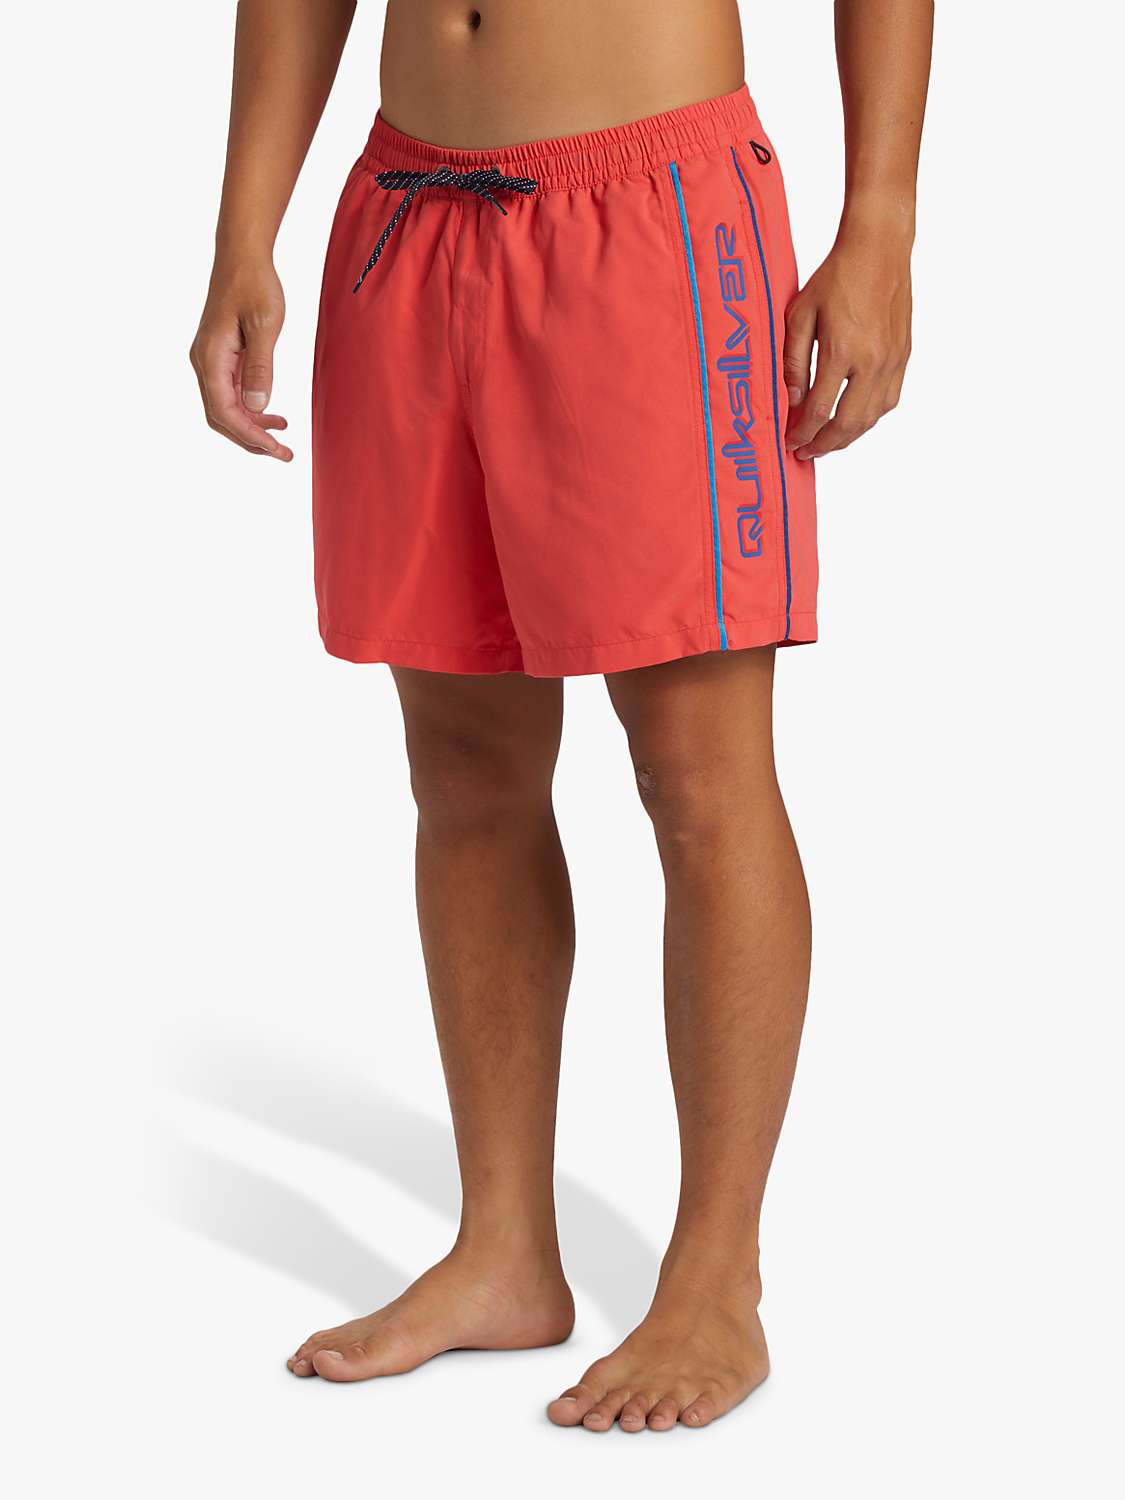 Buy Quiksilver Everyday Collection Recycled Swim Shorts, Cayenne Online at johnlewis.com